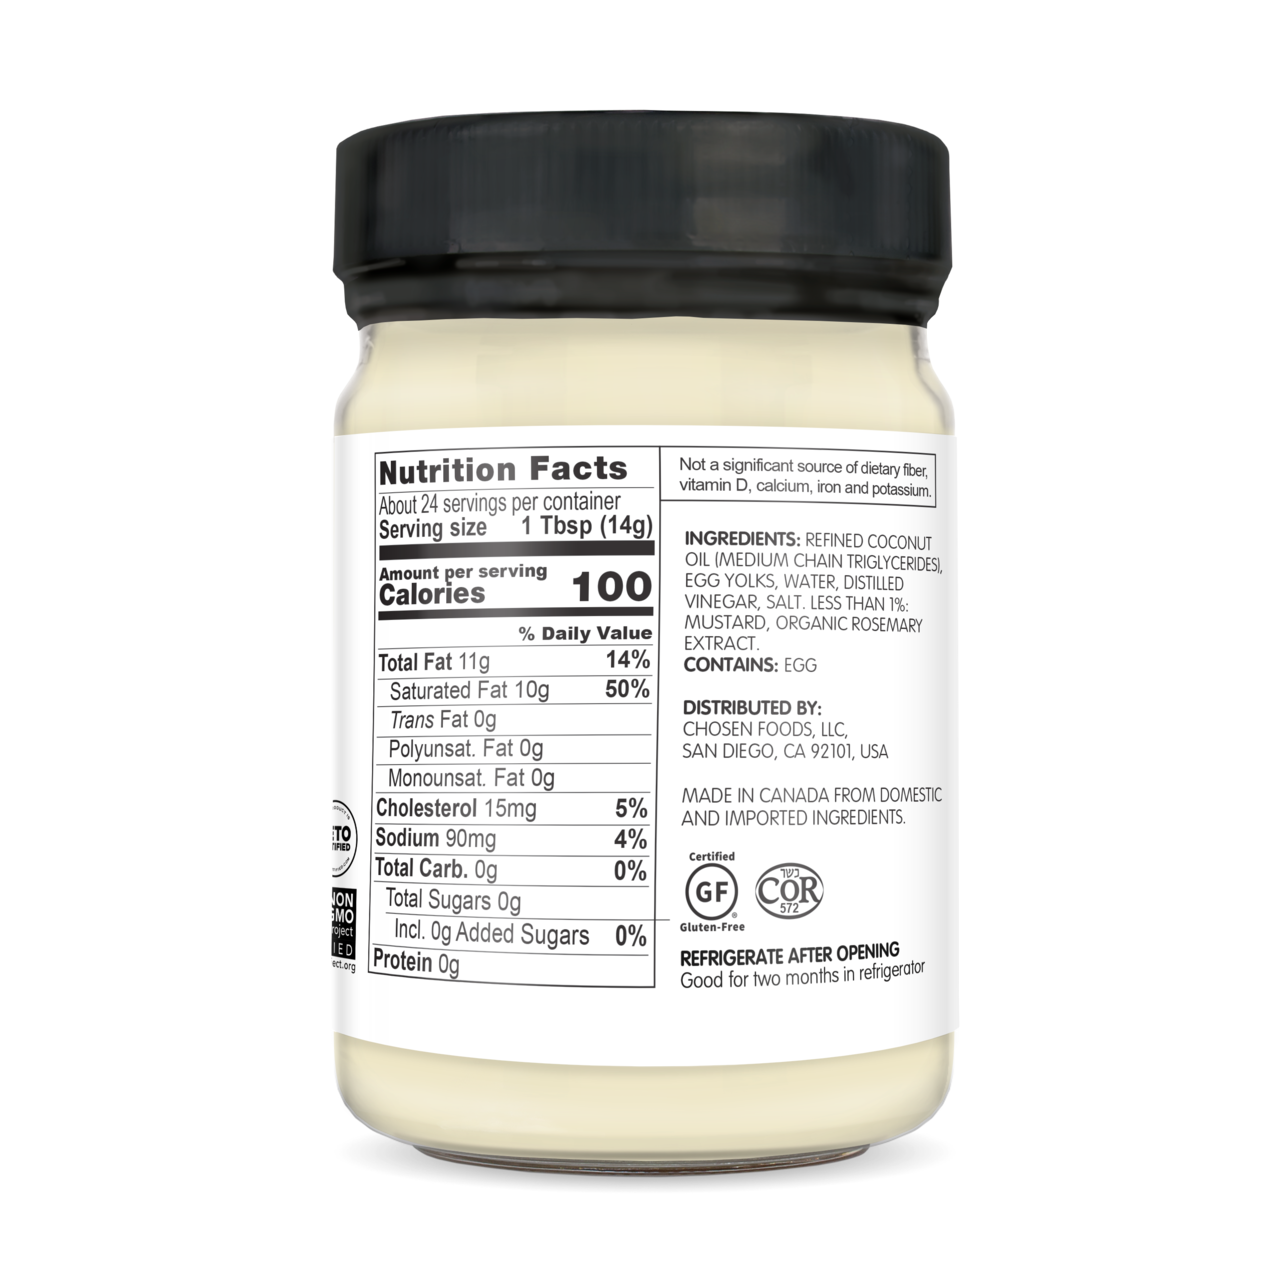 Chosen Foods Classic Keto Mayonnaise with MCT Oil, Gluten & Dairy Free,  Low-Carb, Keto & Paleo Diet Friendly, Mayo for Sandwiches, Dressings and